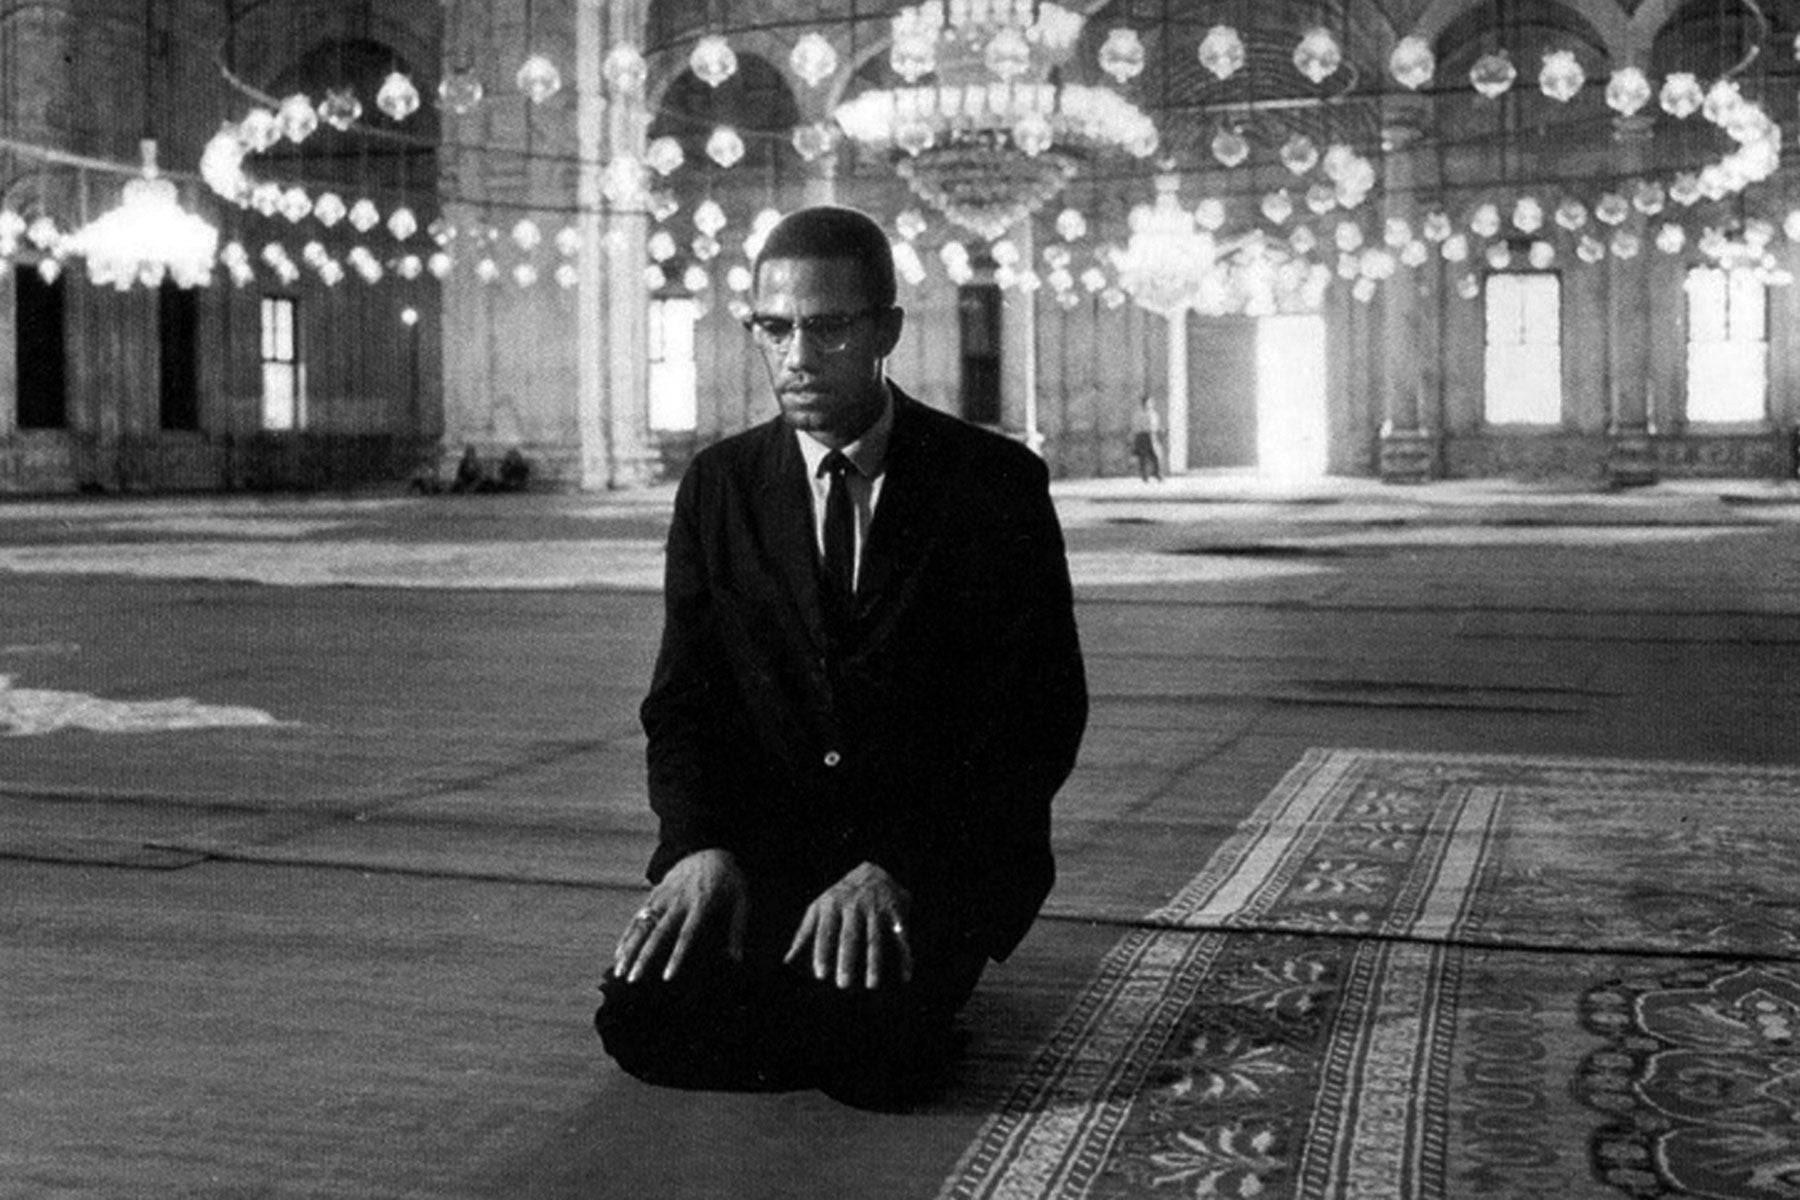 Malcolm X at a mosque after his pilgrimage to Mecca.